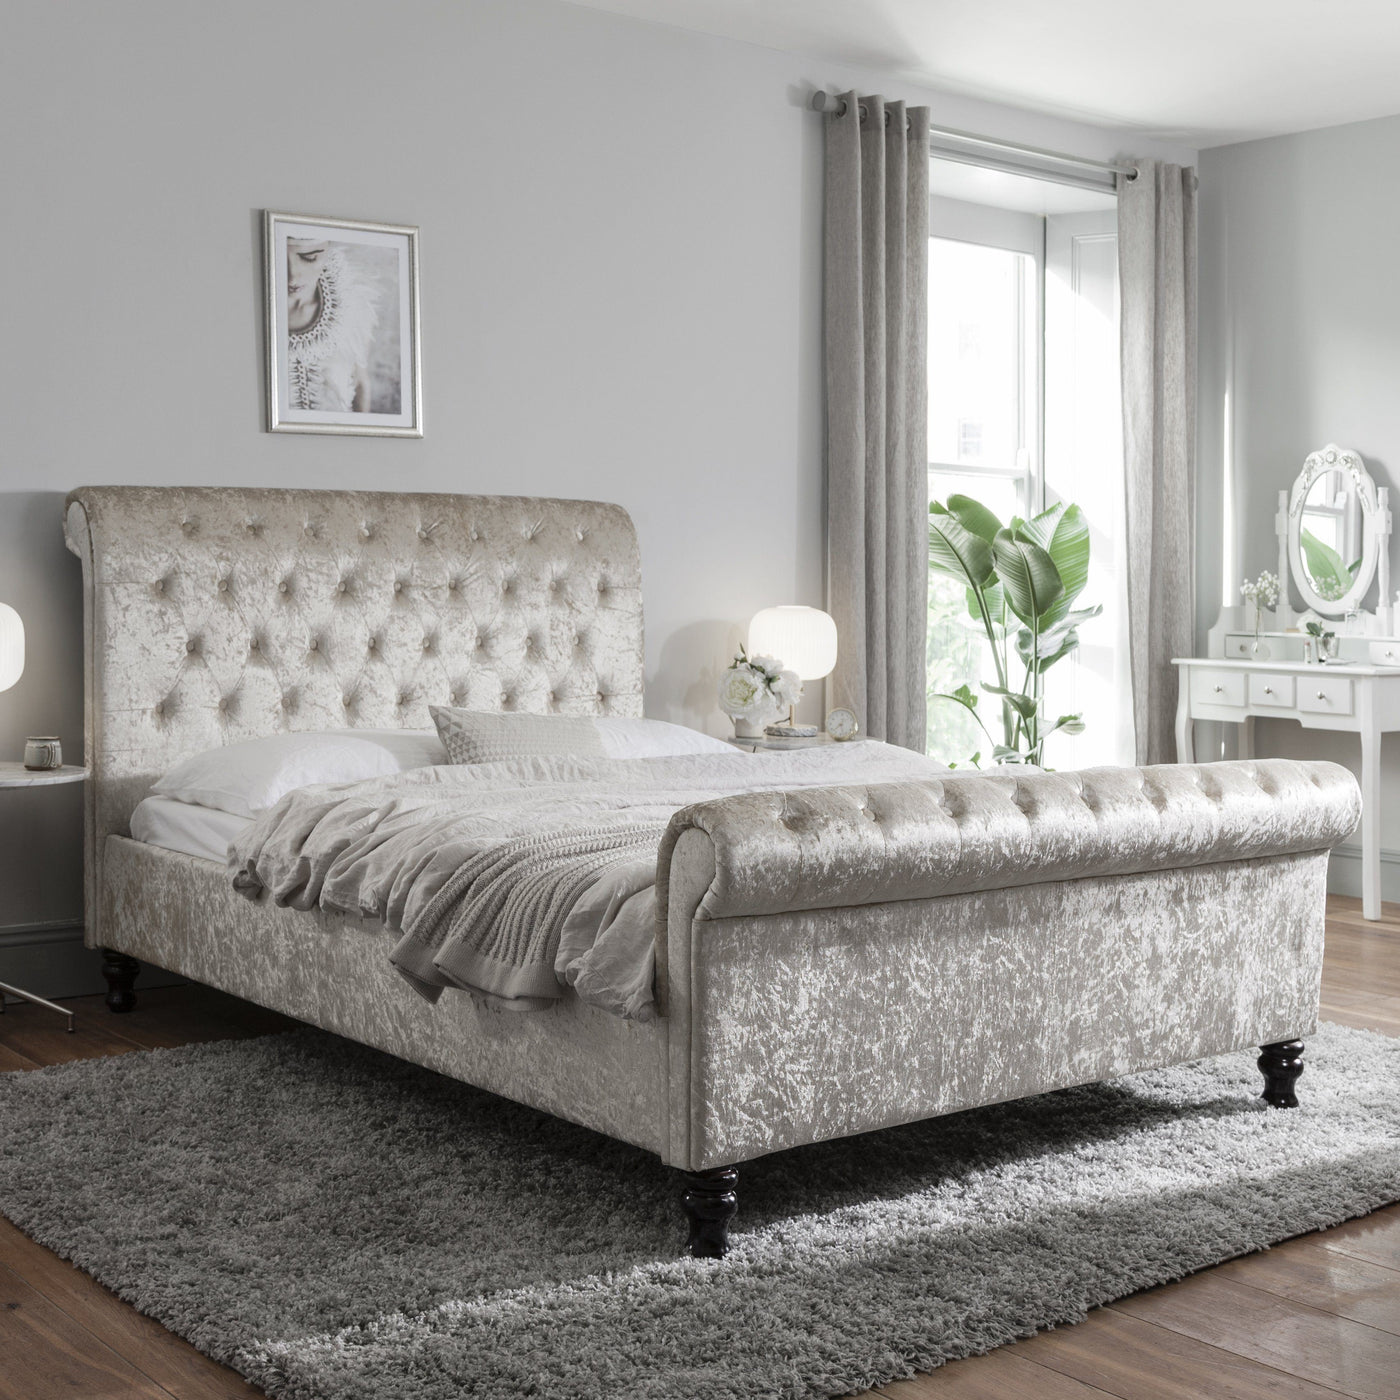 Cremio Chesterfield Sleigh Scroll Bed Frame Bed Frame bedsplus 